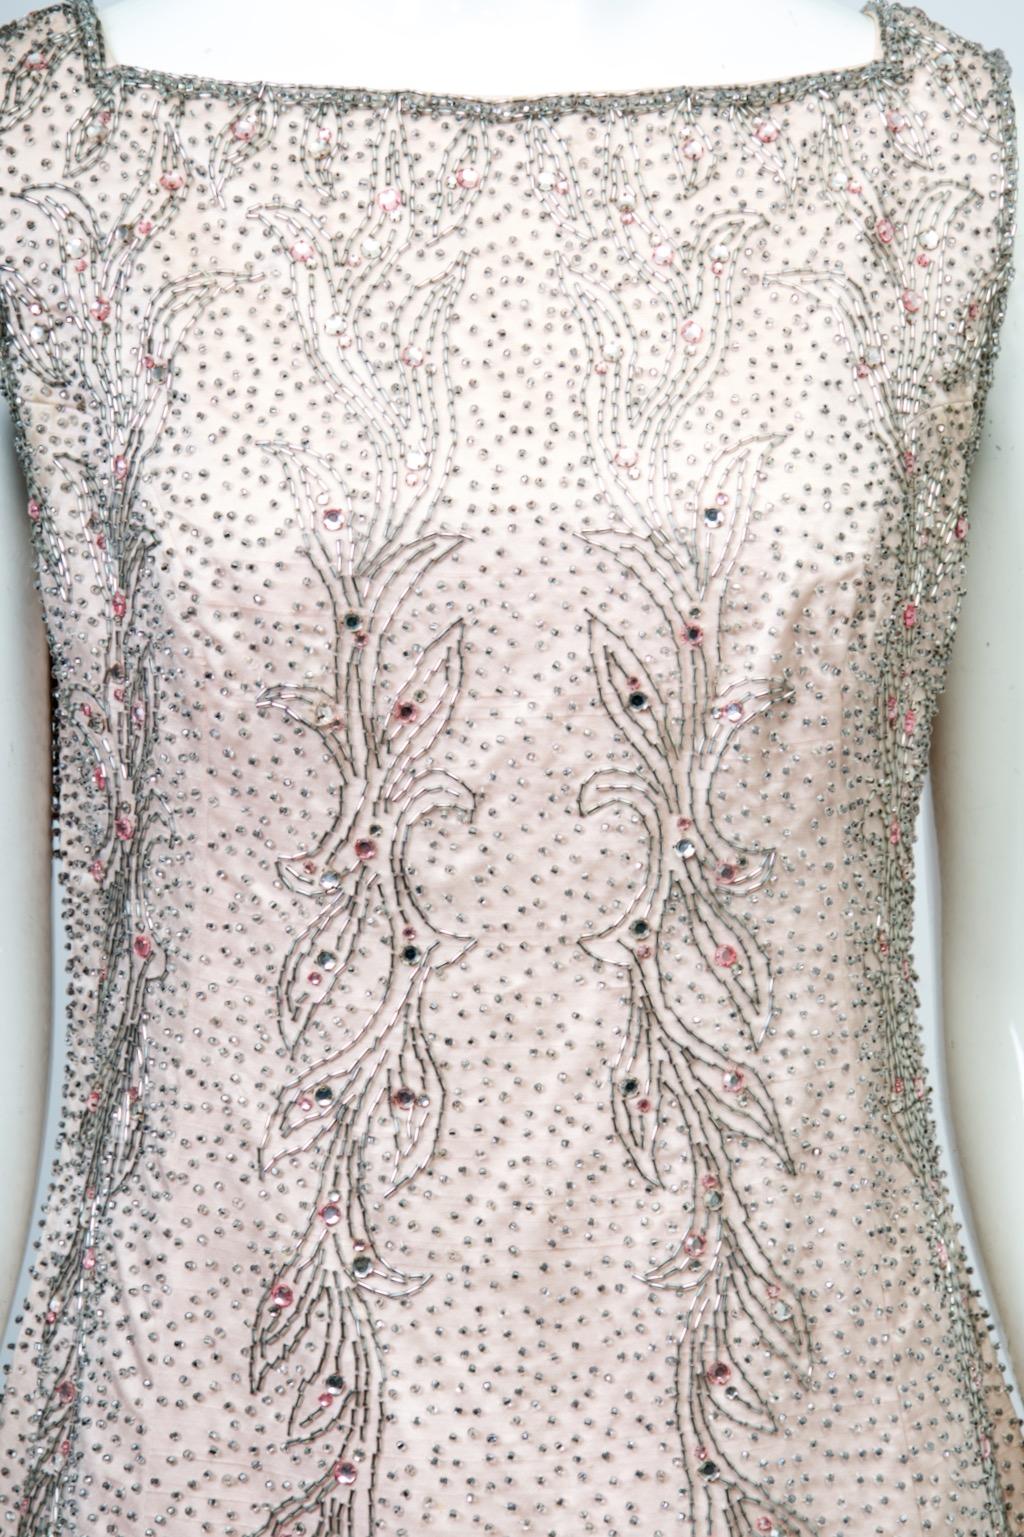 1960s evening dress by Malcolm Starr in pale pink satin with beaded emellishment throughout. This consists of primarily silver beads in various shapes and sizes, the body covered with tiny seed beads, while cascading leaf-form motifs in silver bugle